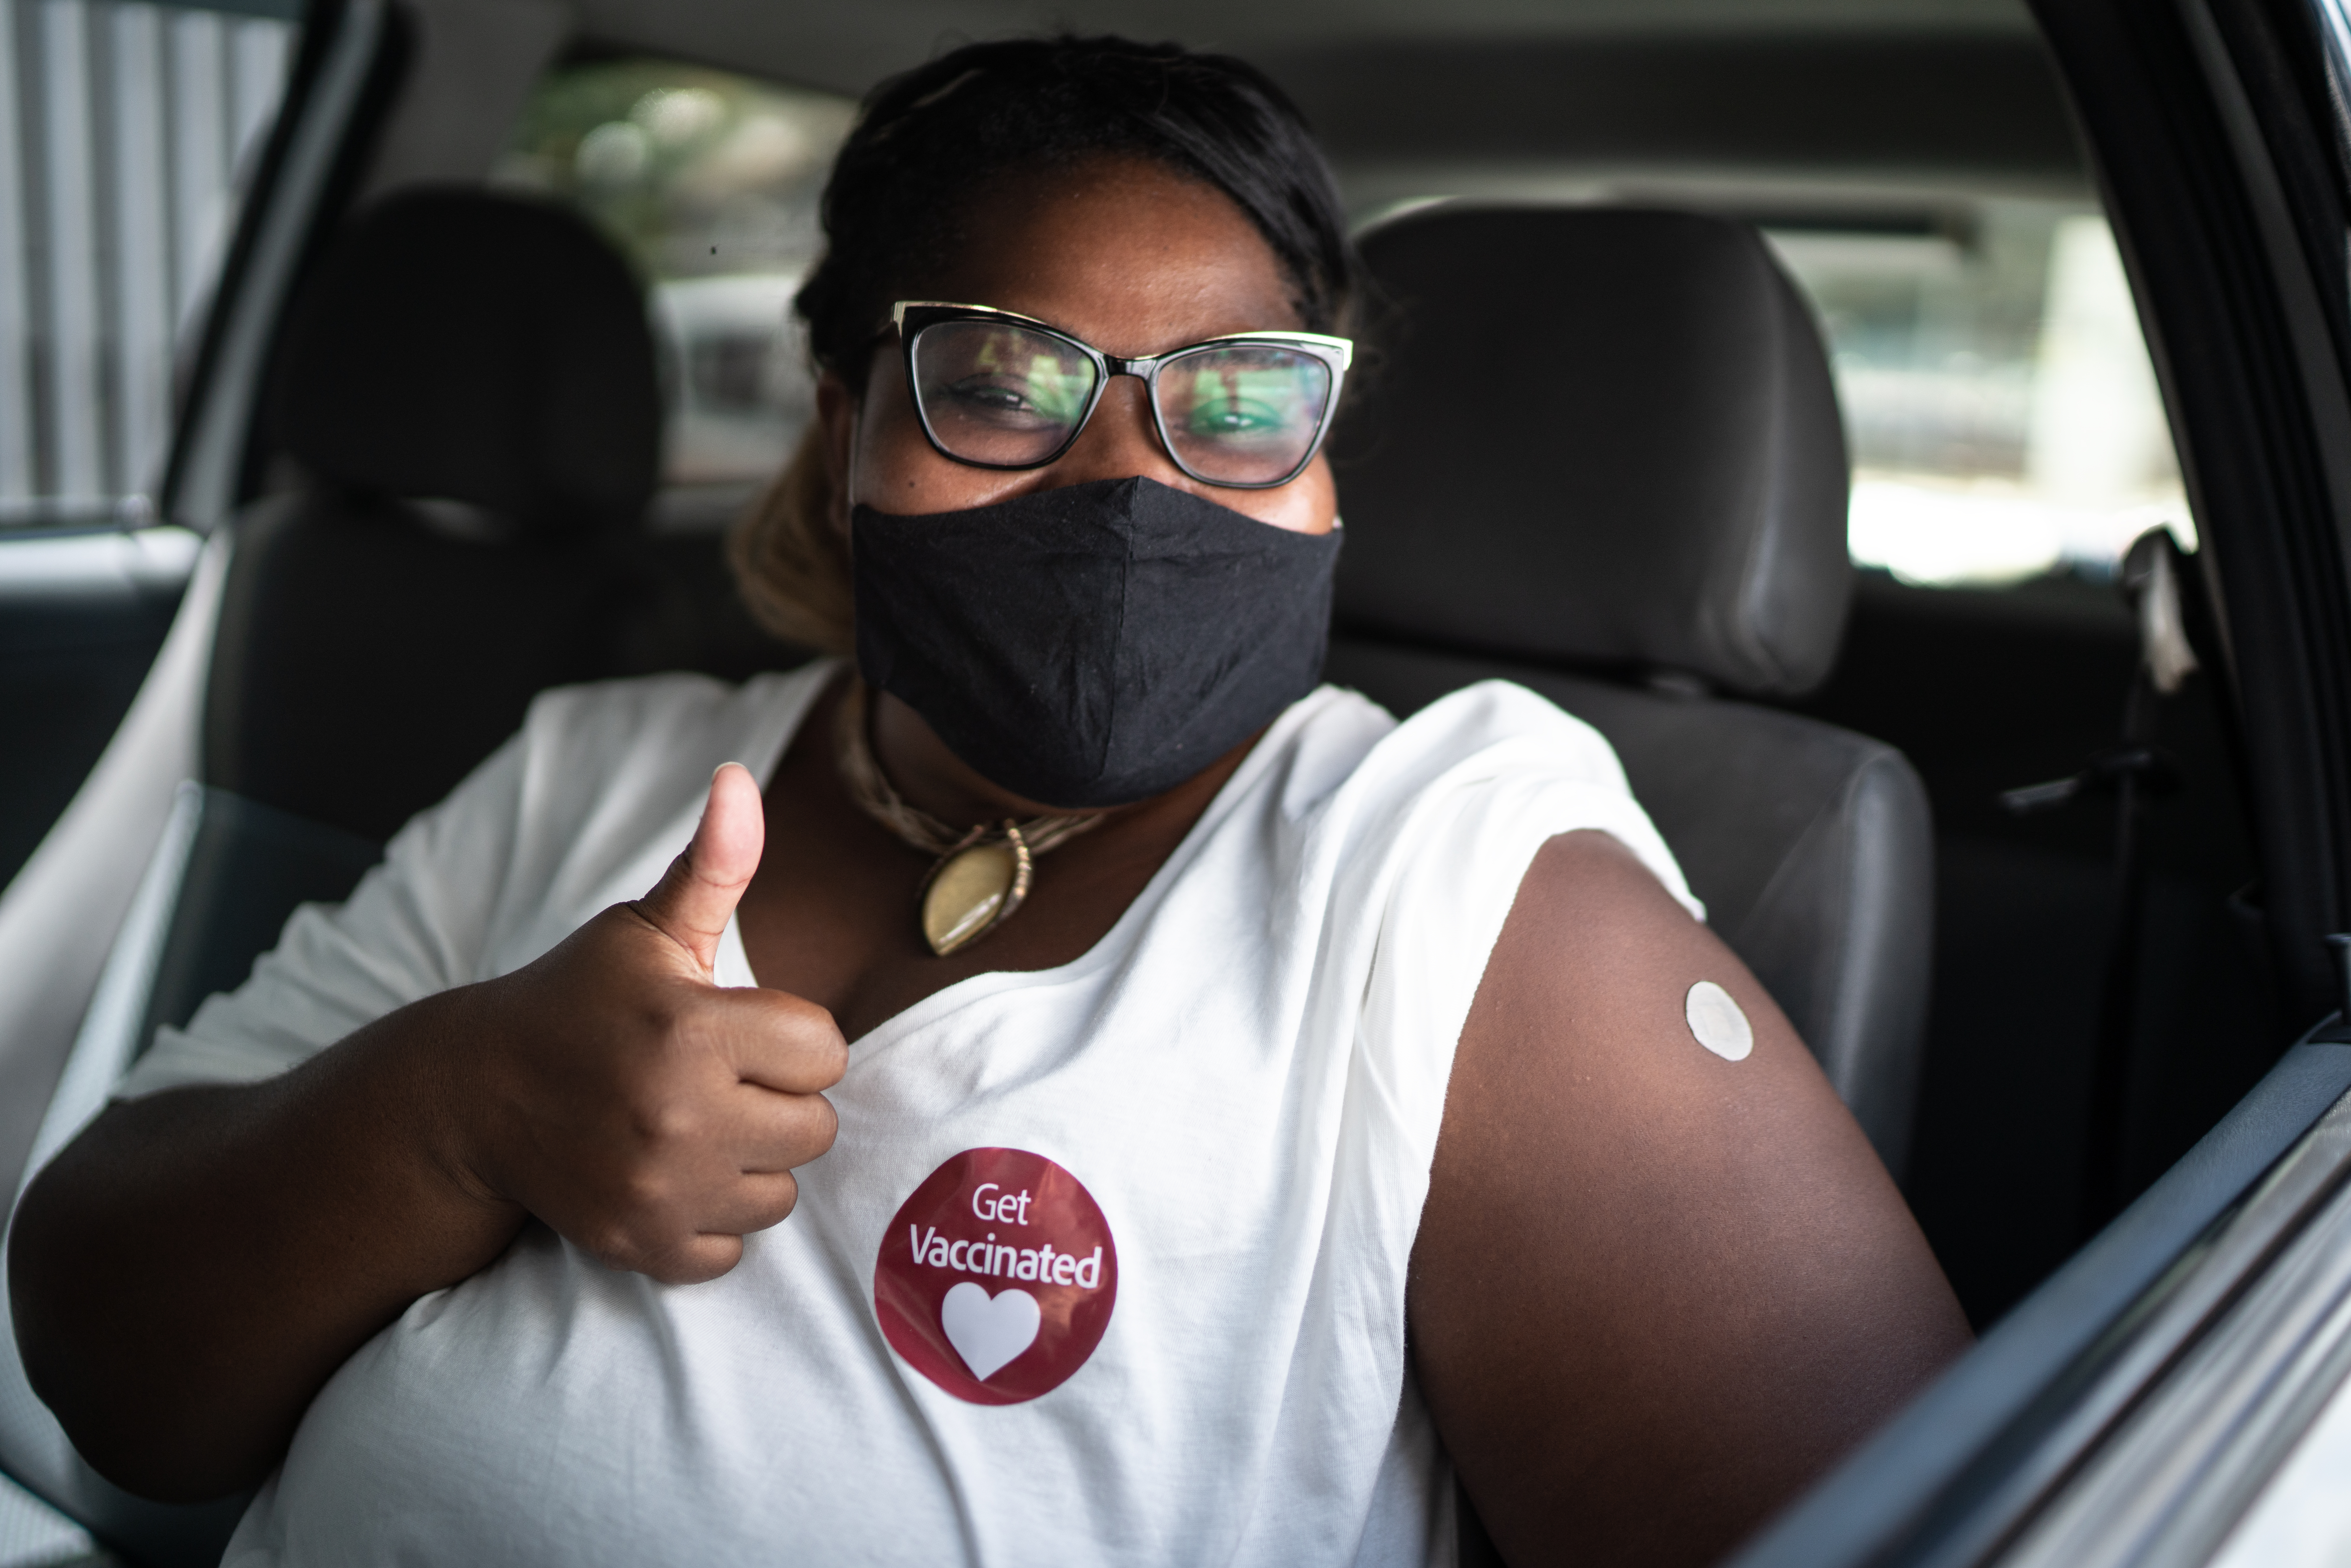 Woman sitting in driver's side of car proudly displaying vaccination sticker